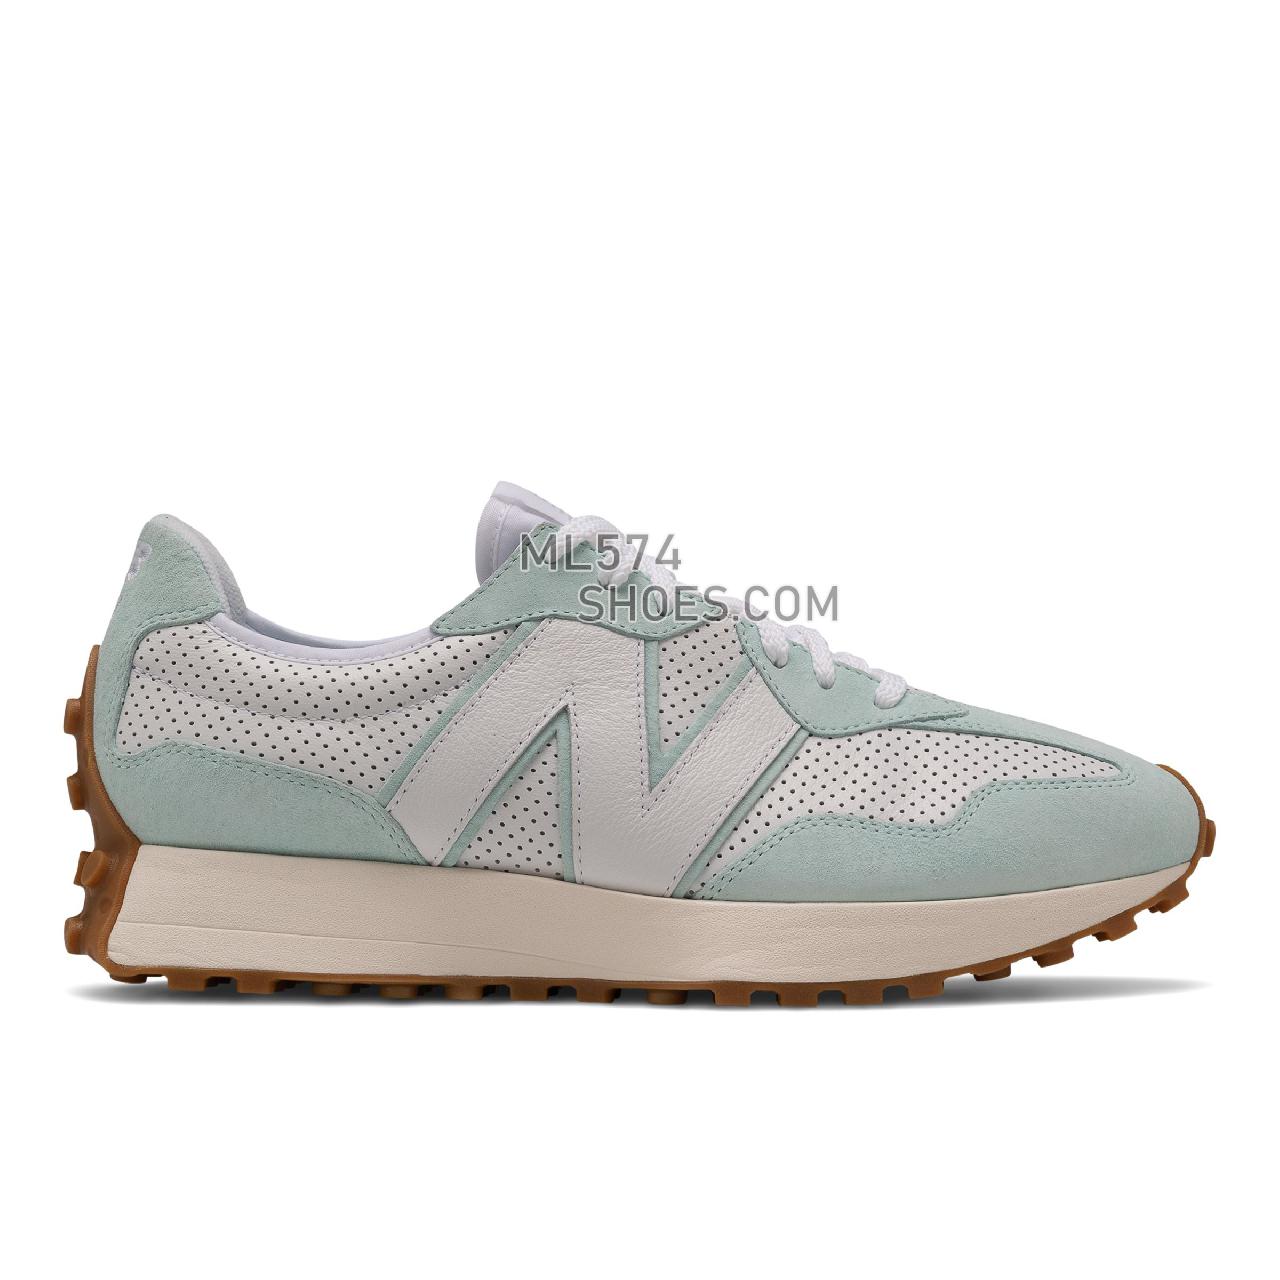 New Balance 327 - Men's Sport Style Sneakers - White with White Mint - MS327PP